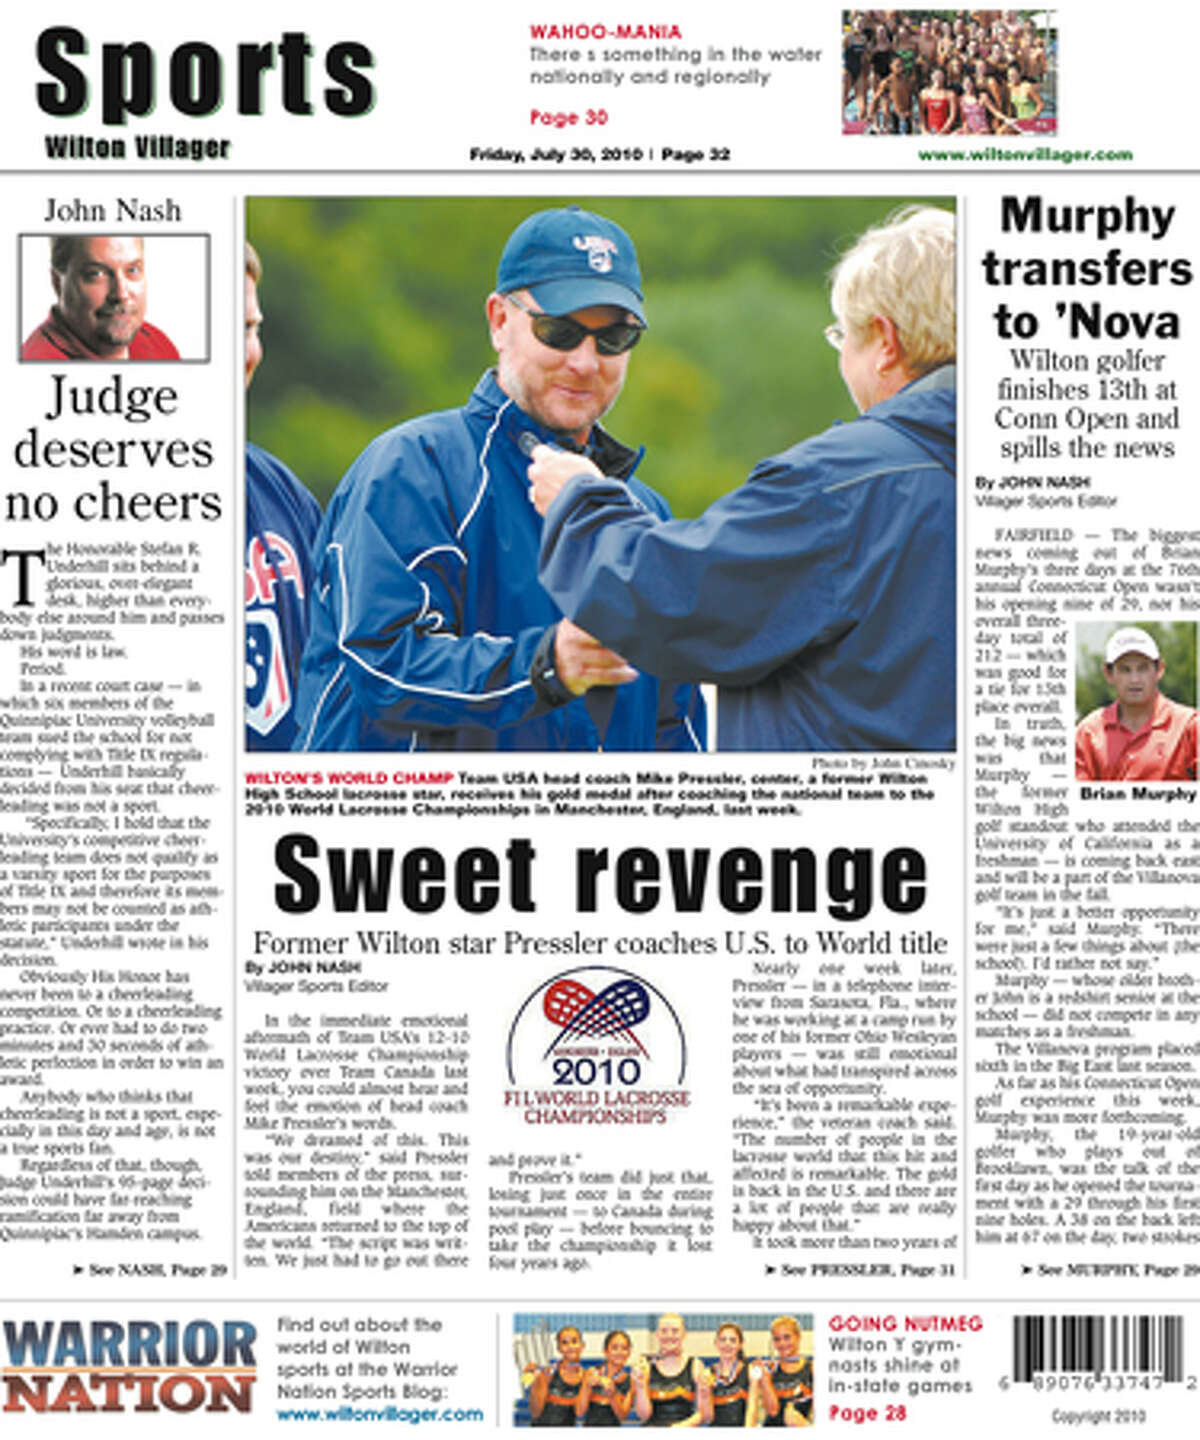 This week in the Wilton Villager (July 30, 2010 edition)